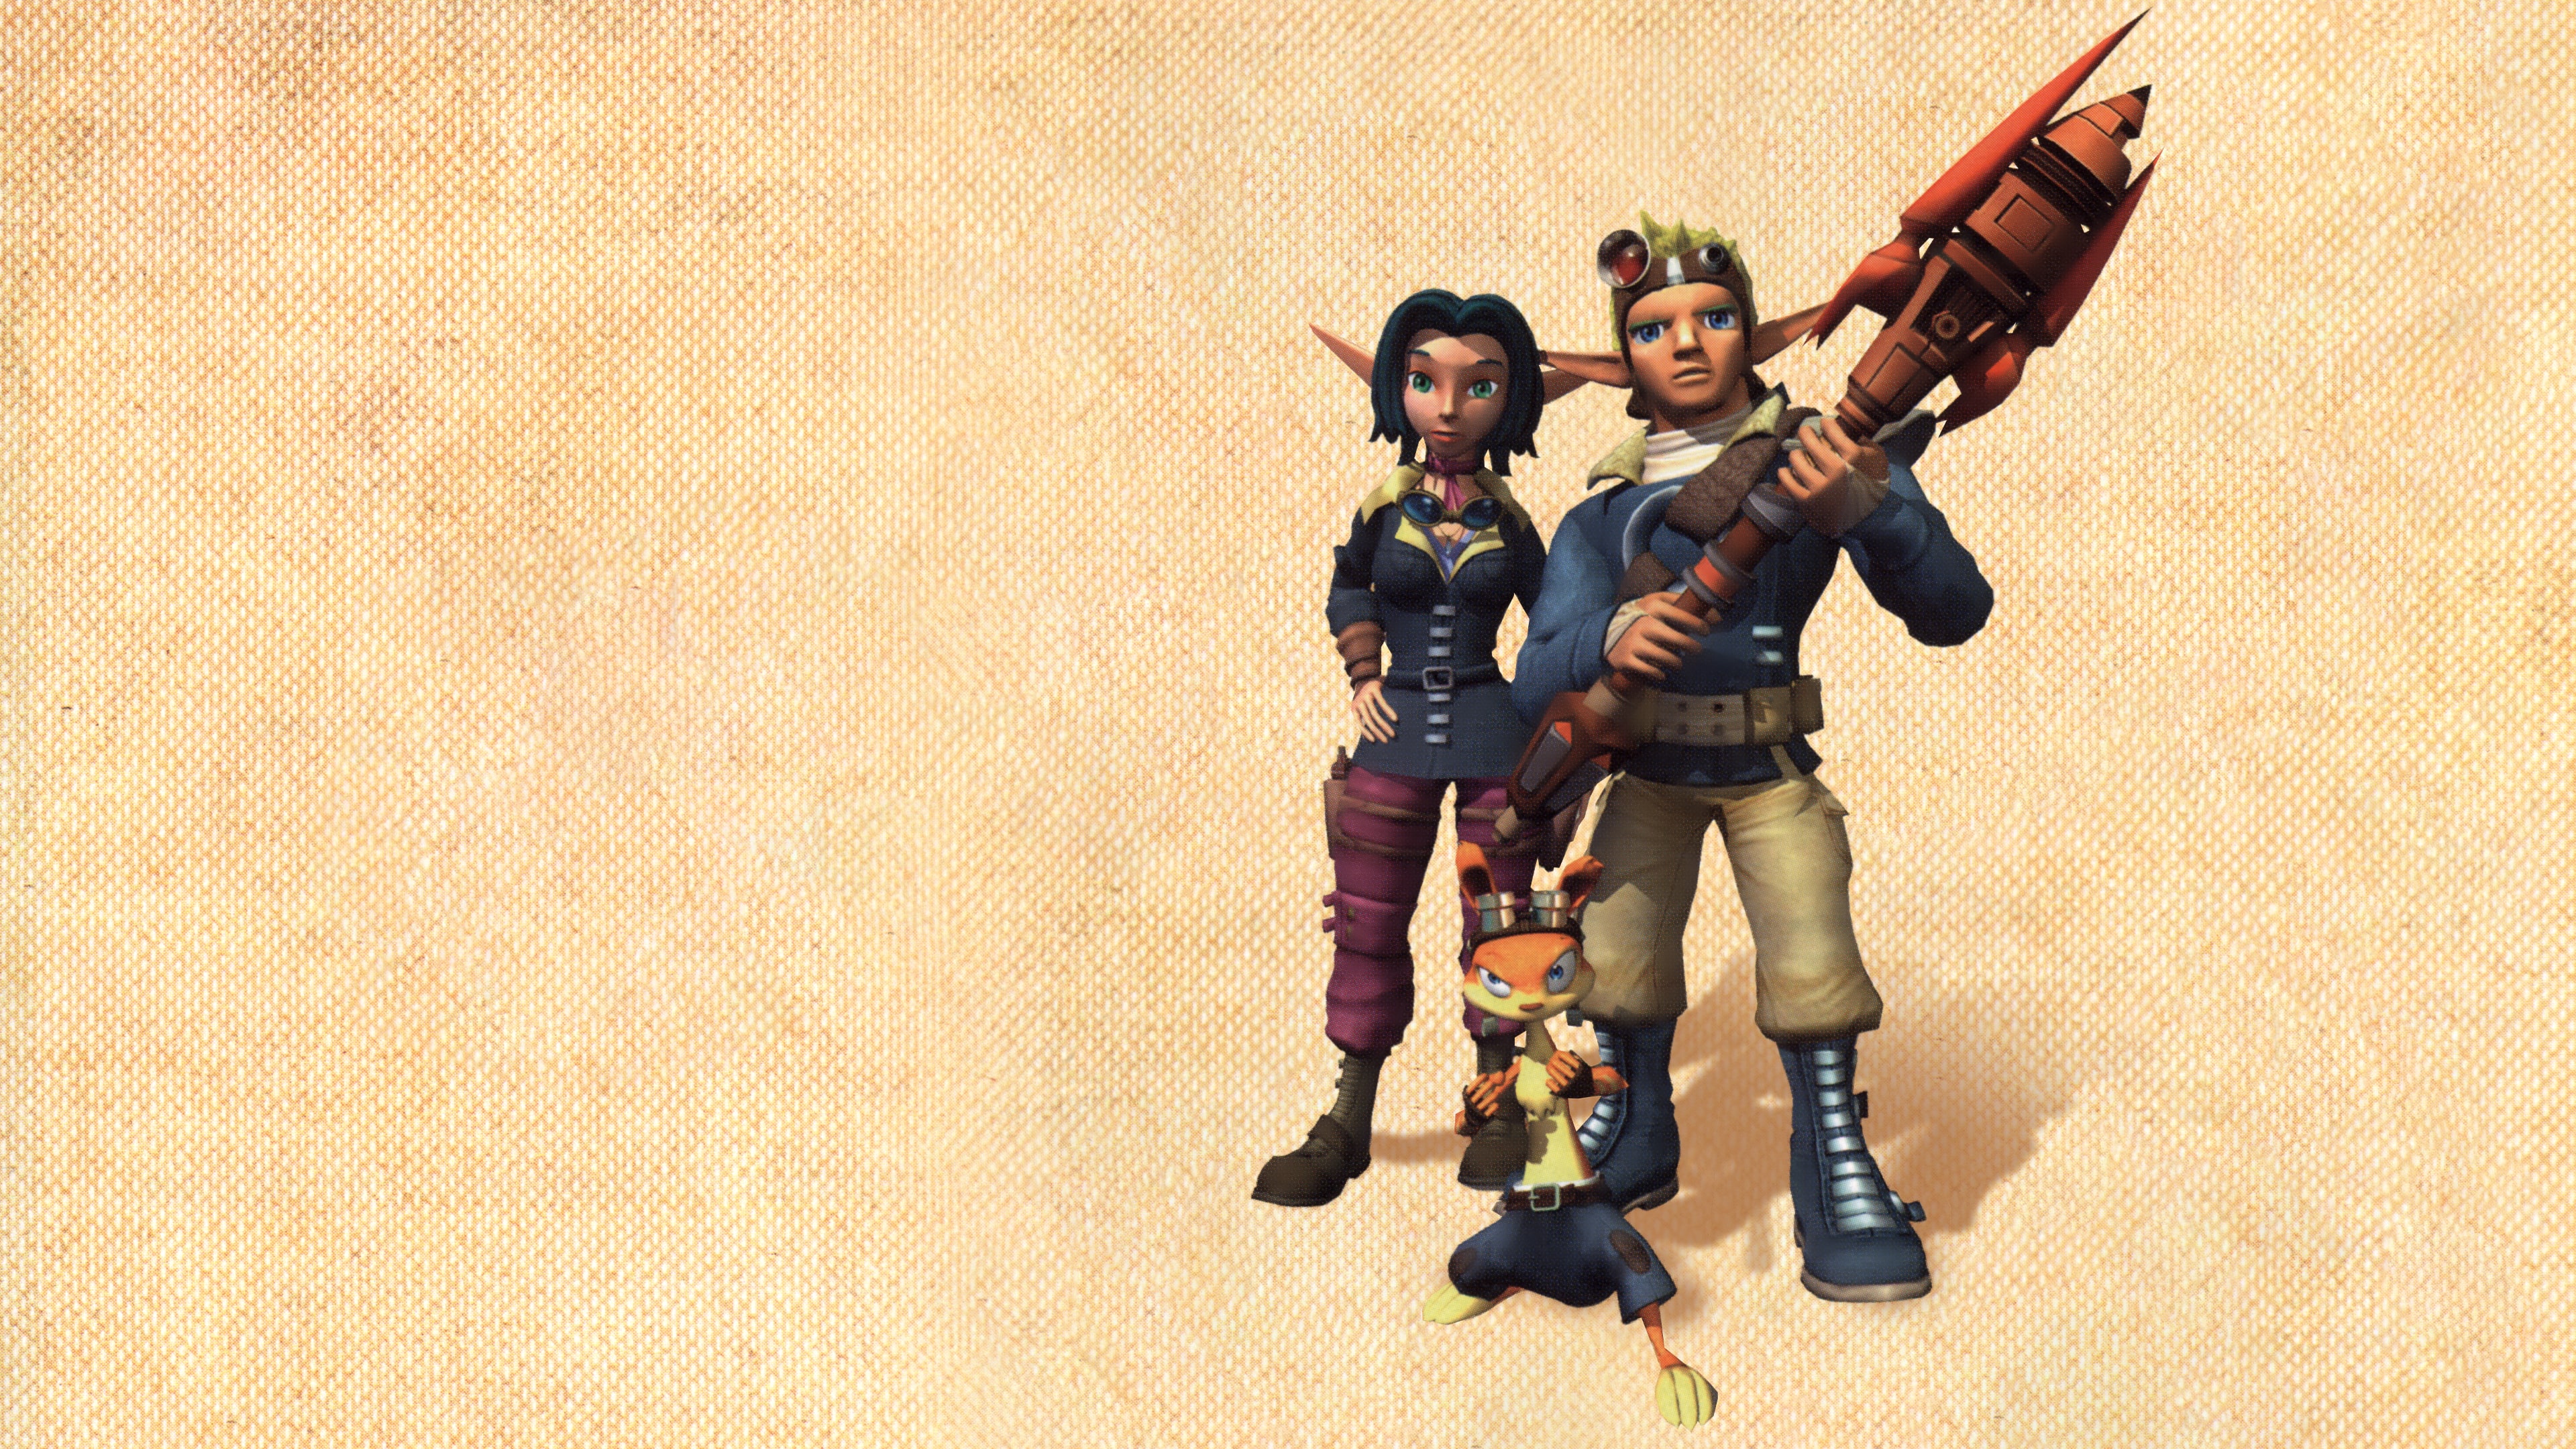 Jak and Daxter: The Lost Frontier (English, Japanese)